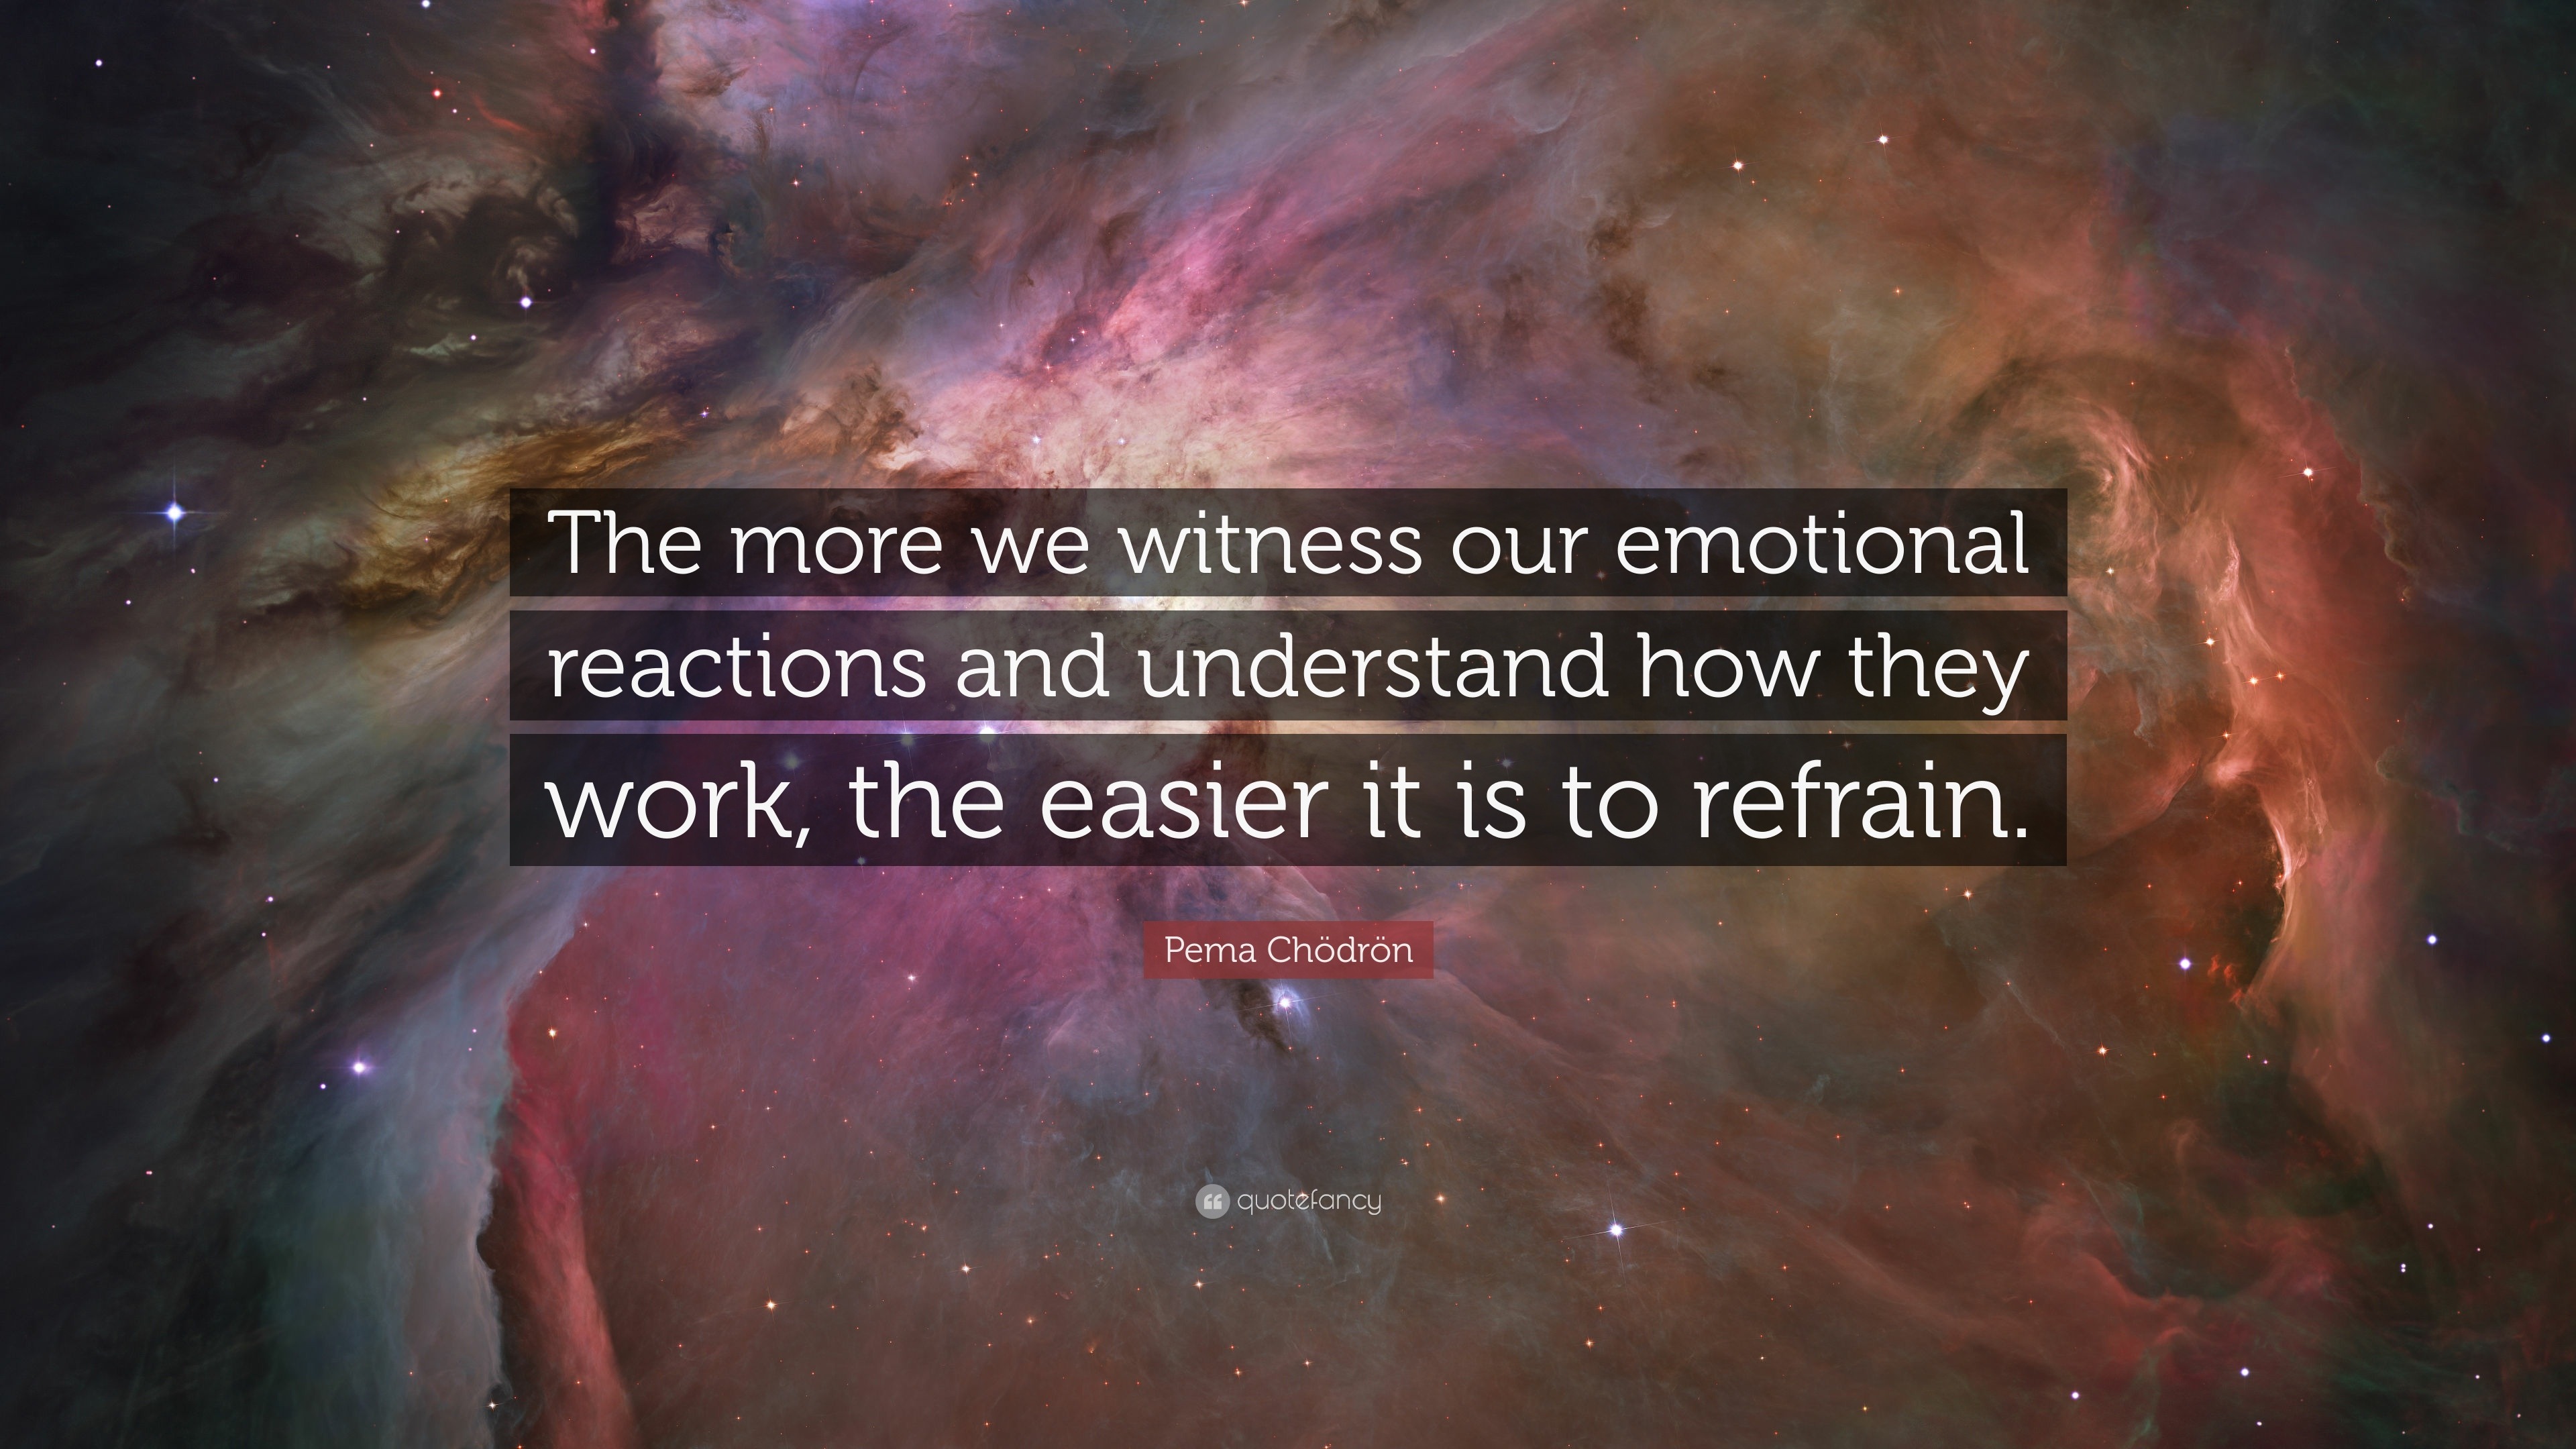 Pema Chödrön Quote: “The more we witness our emotional reactions and  understand how they work, the